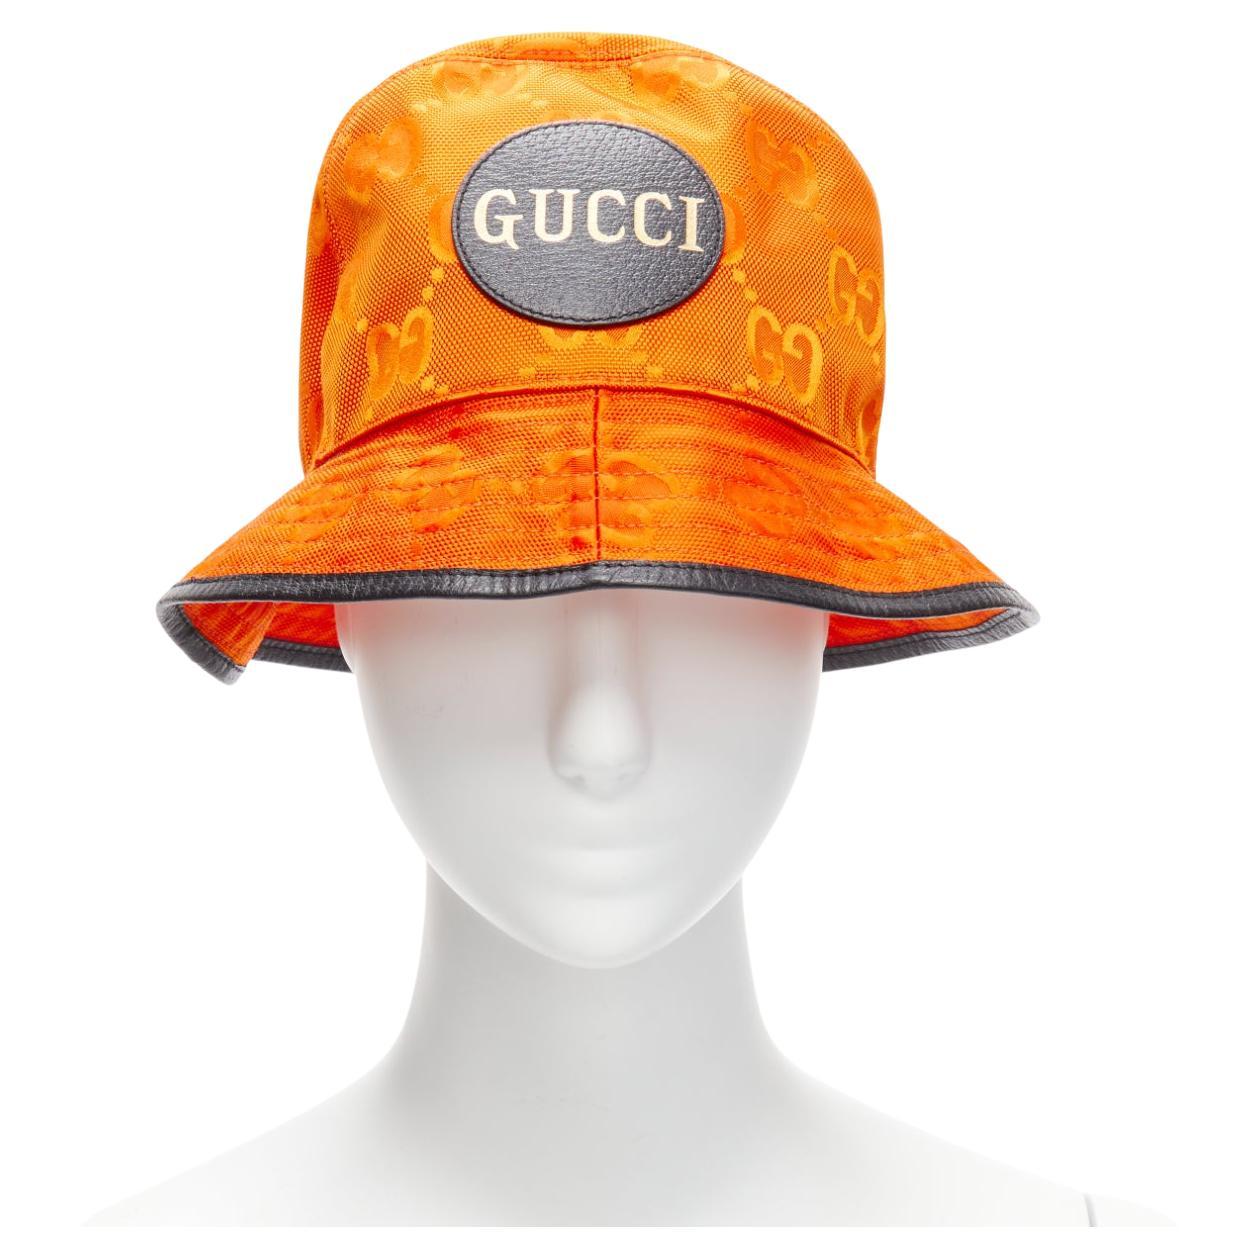 How do I clean a Gucci hat?